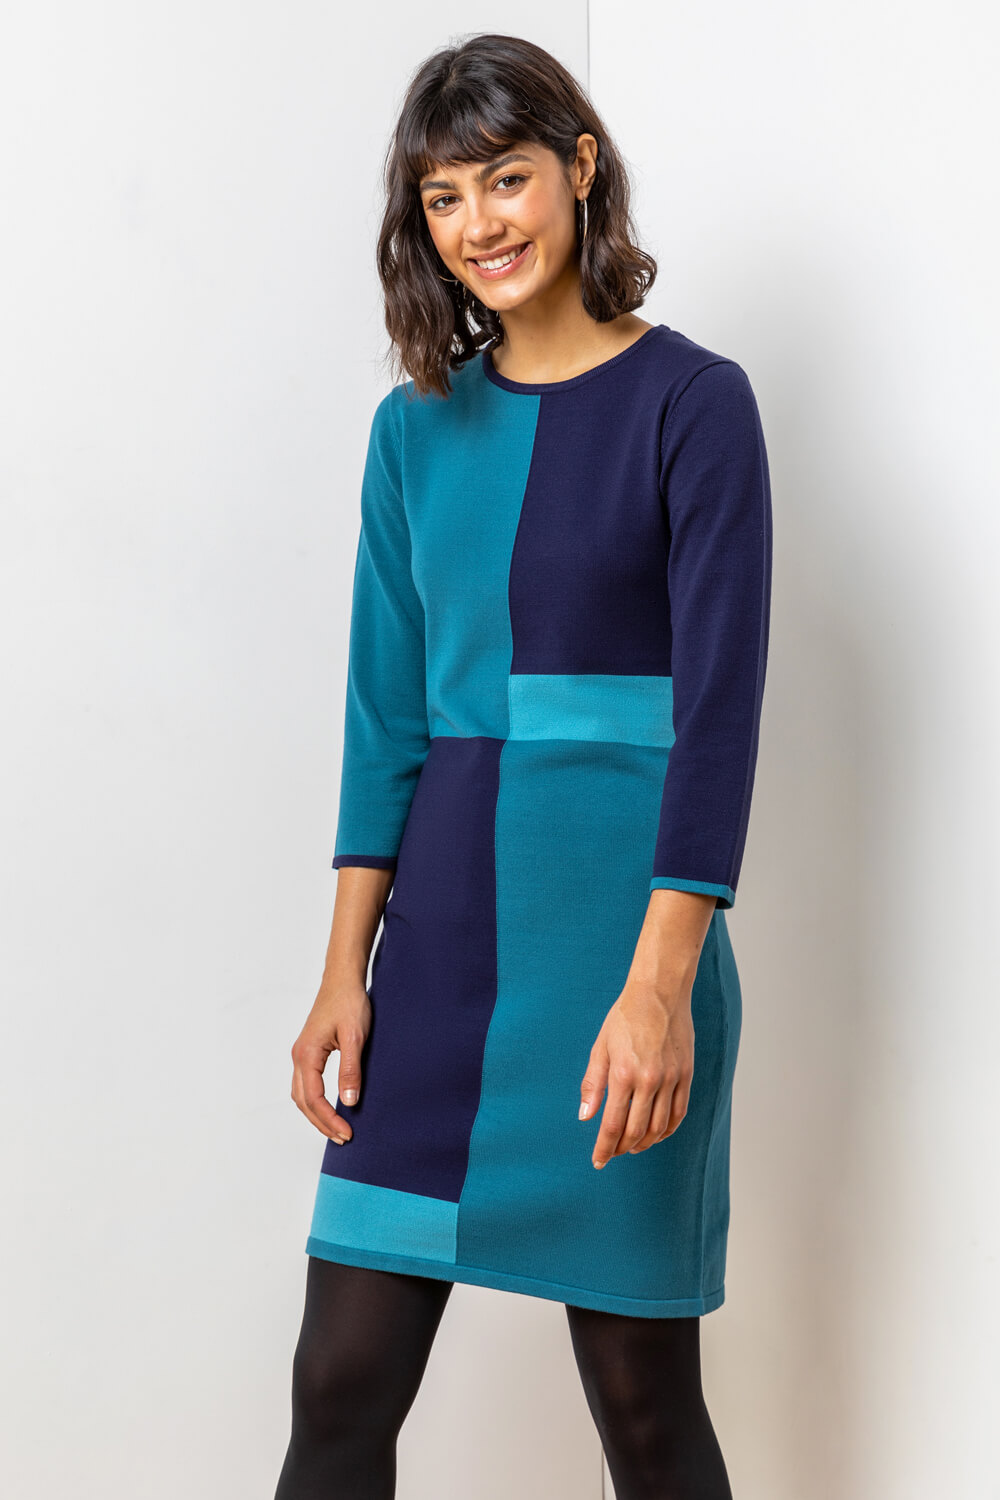 Blue Colour Block Knitted Dress, Image 5 of 5